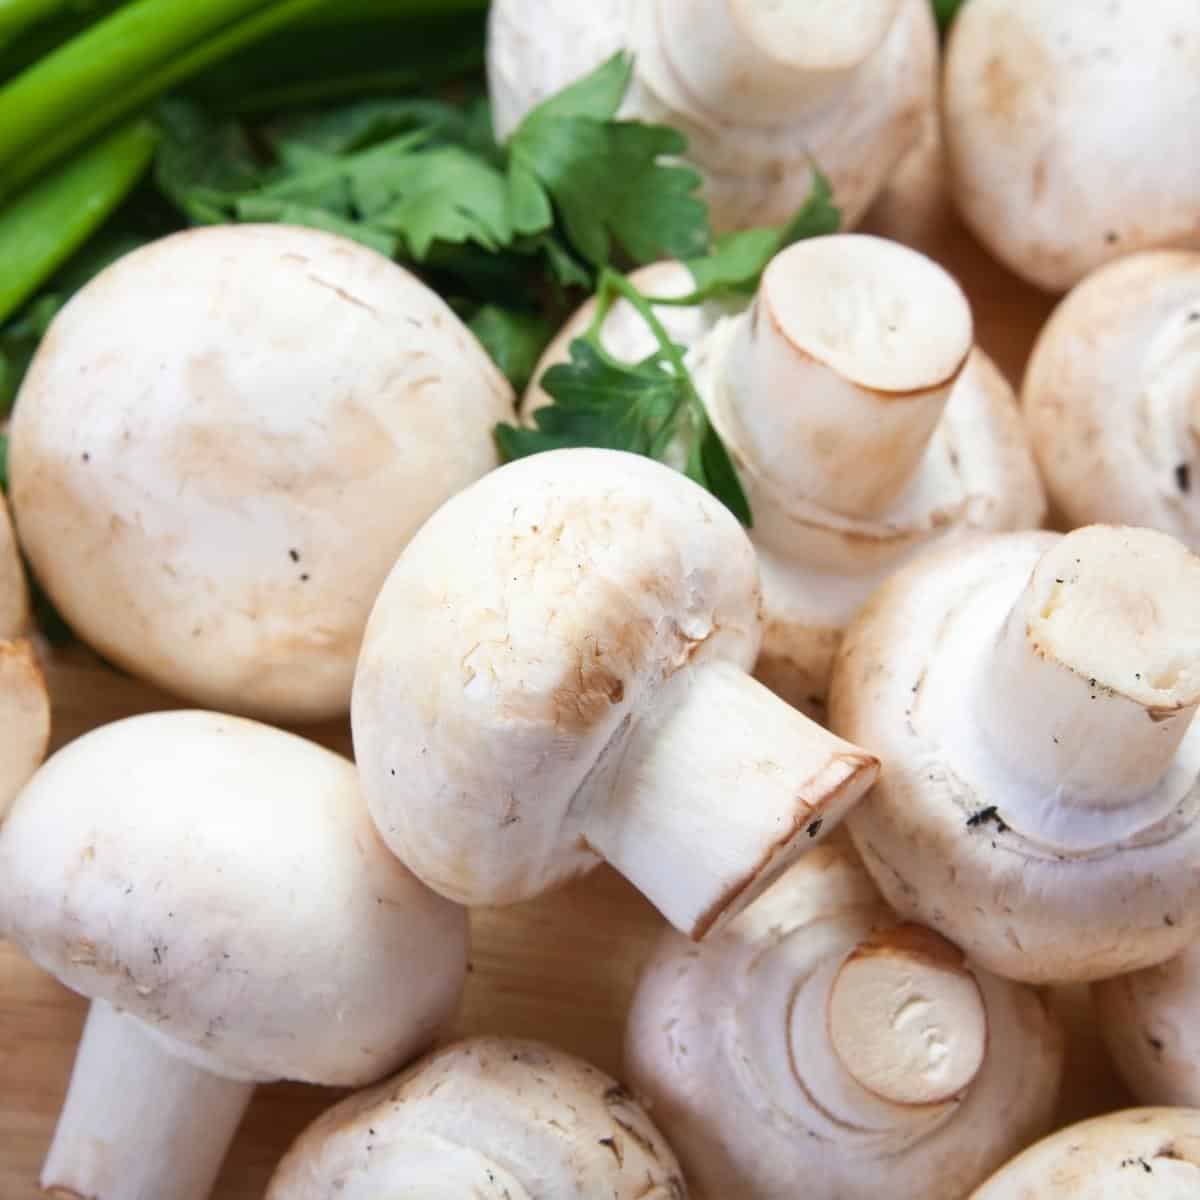 Health benefits of mushrooms you didn’t know